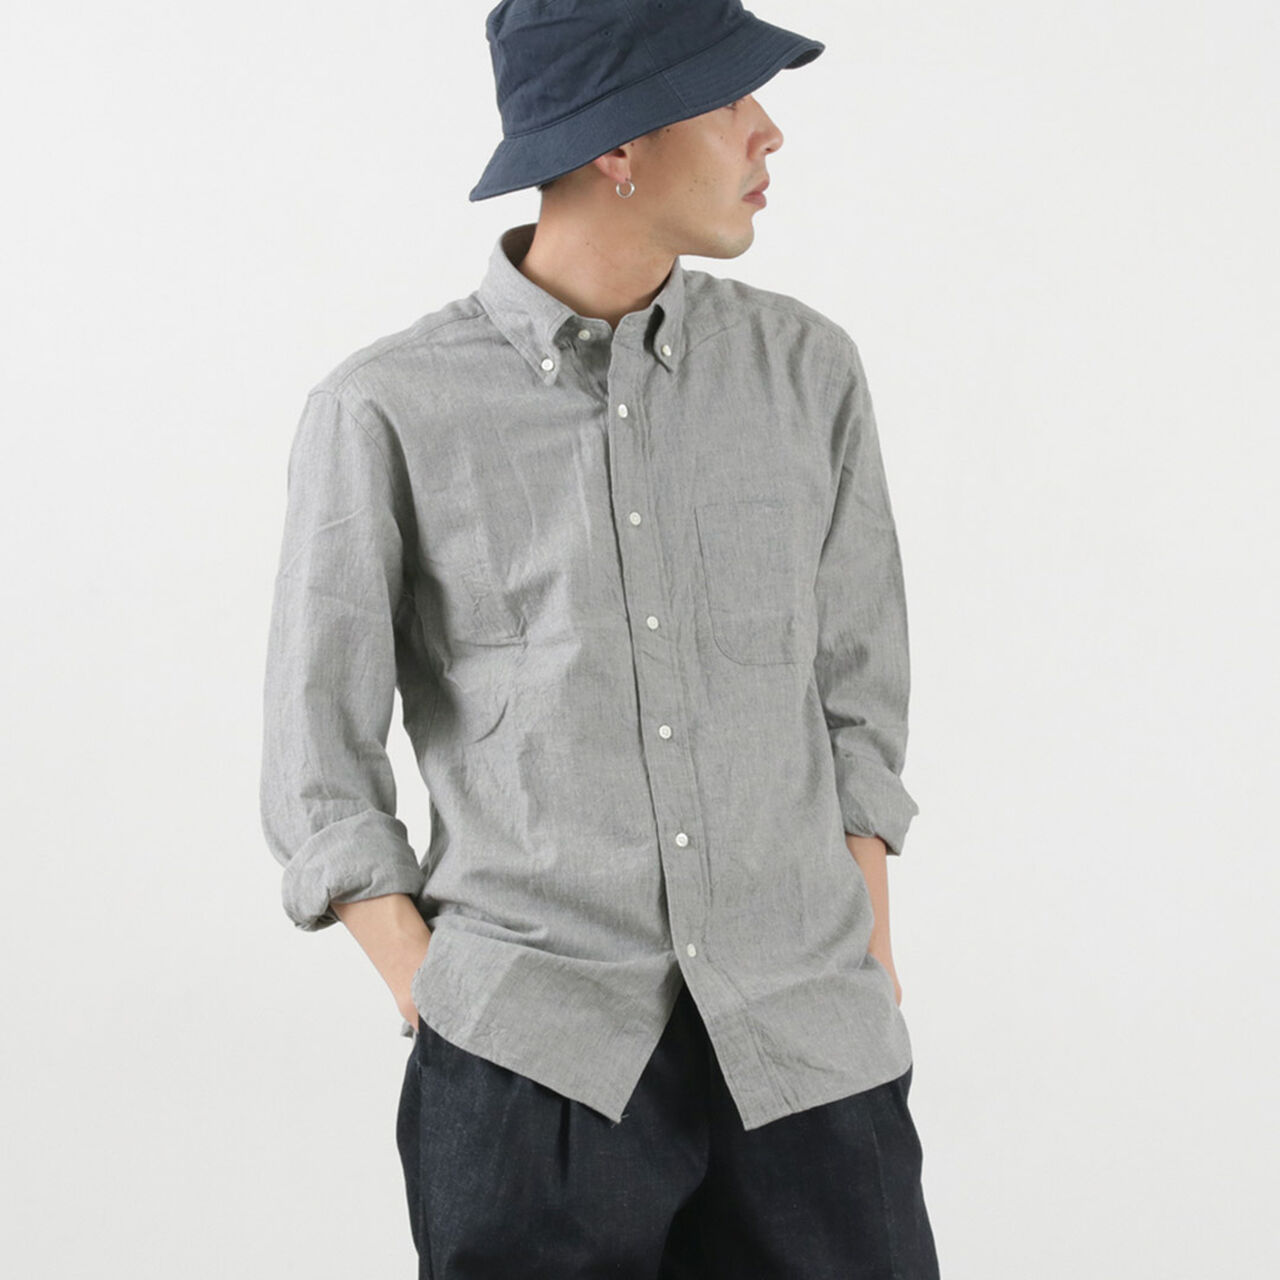 Selvage Chambray Button Down Shirt,Grey, large image number 0